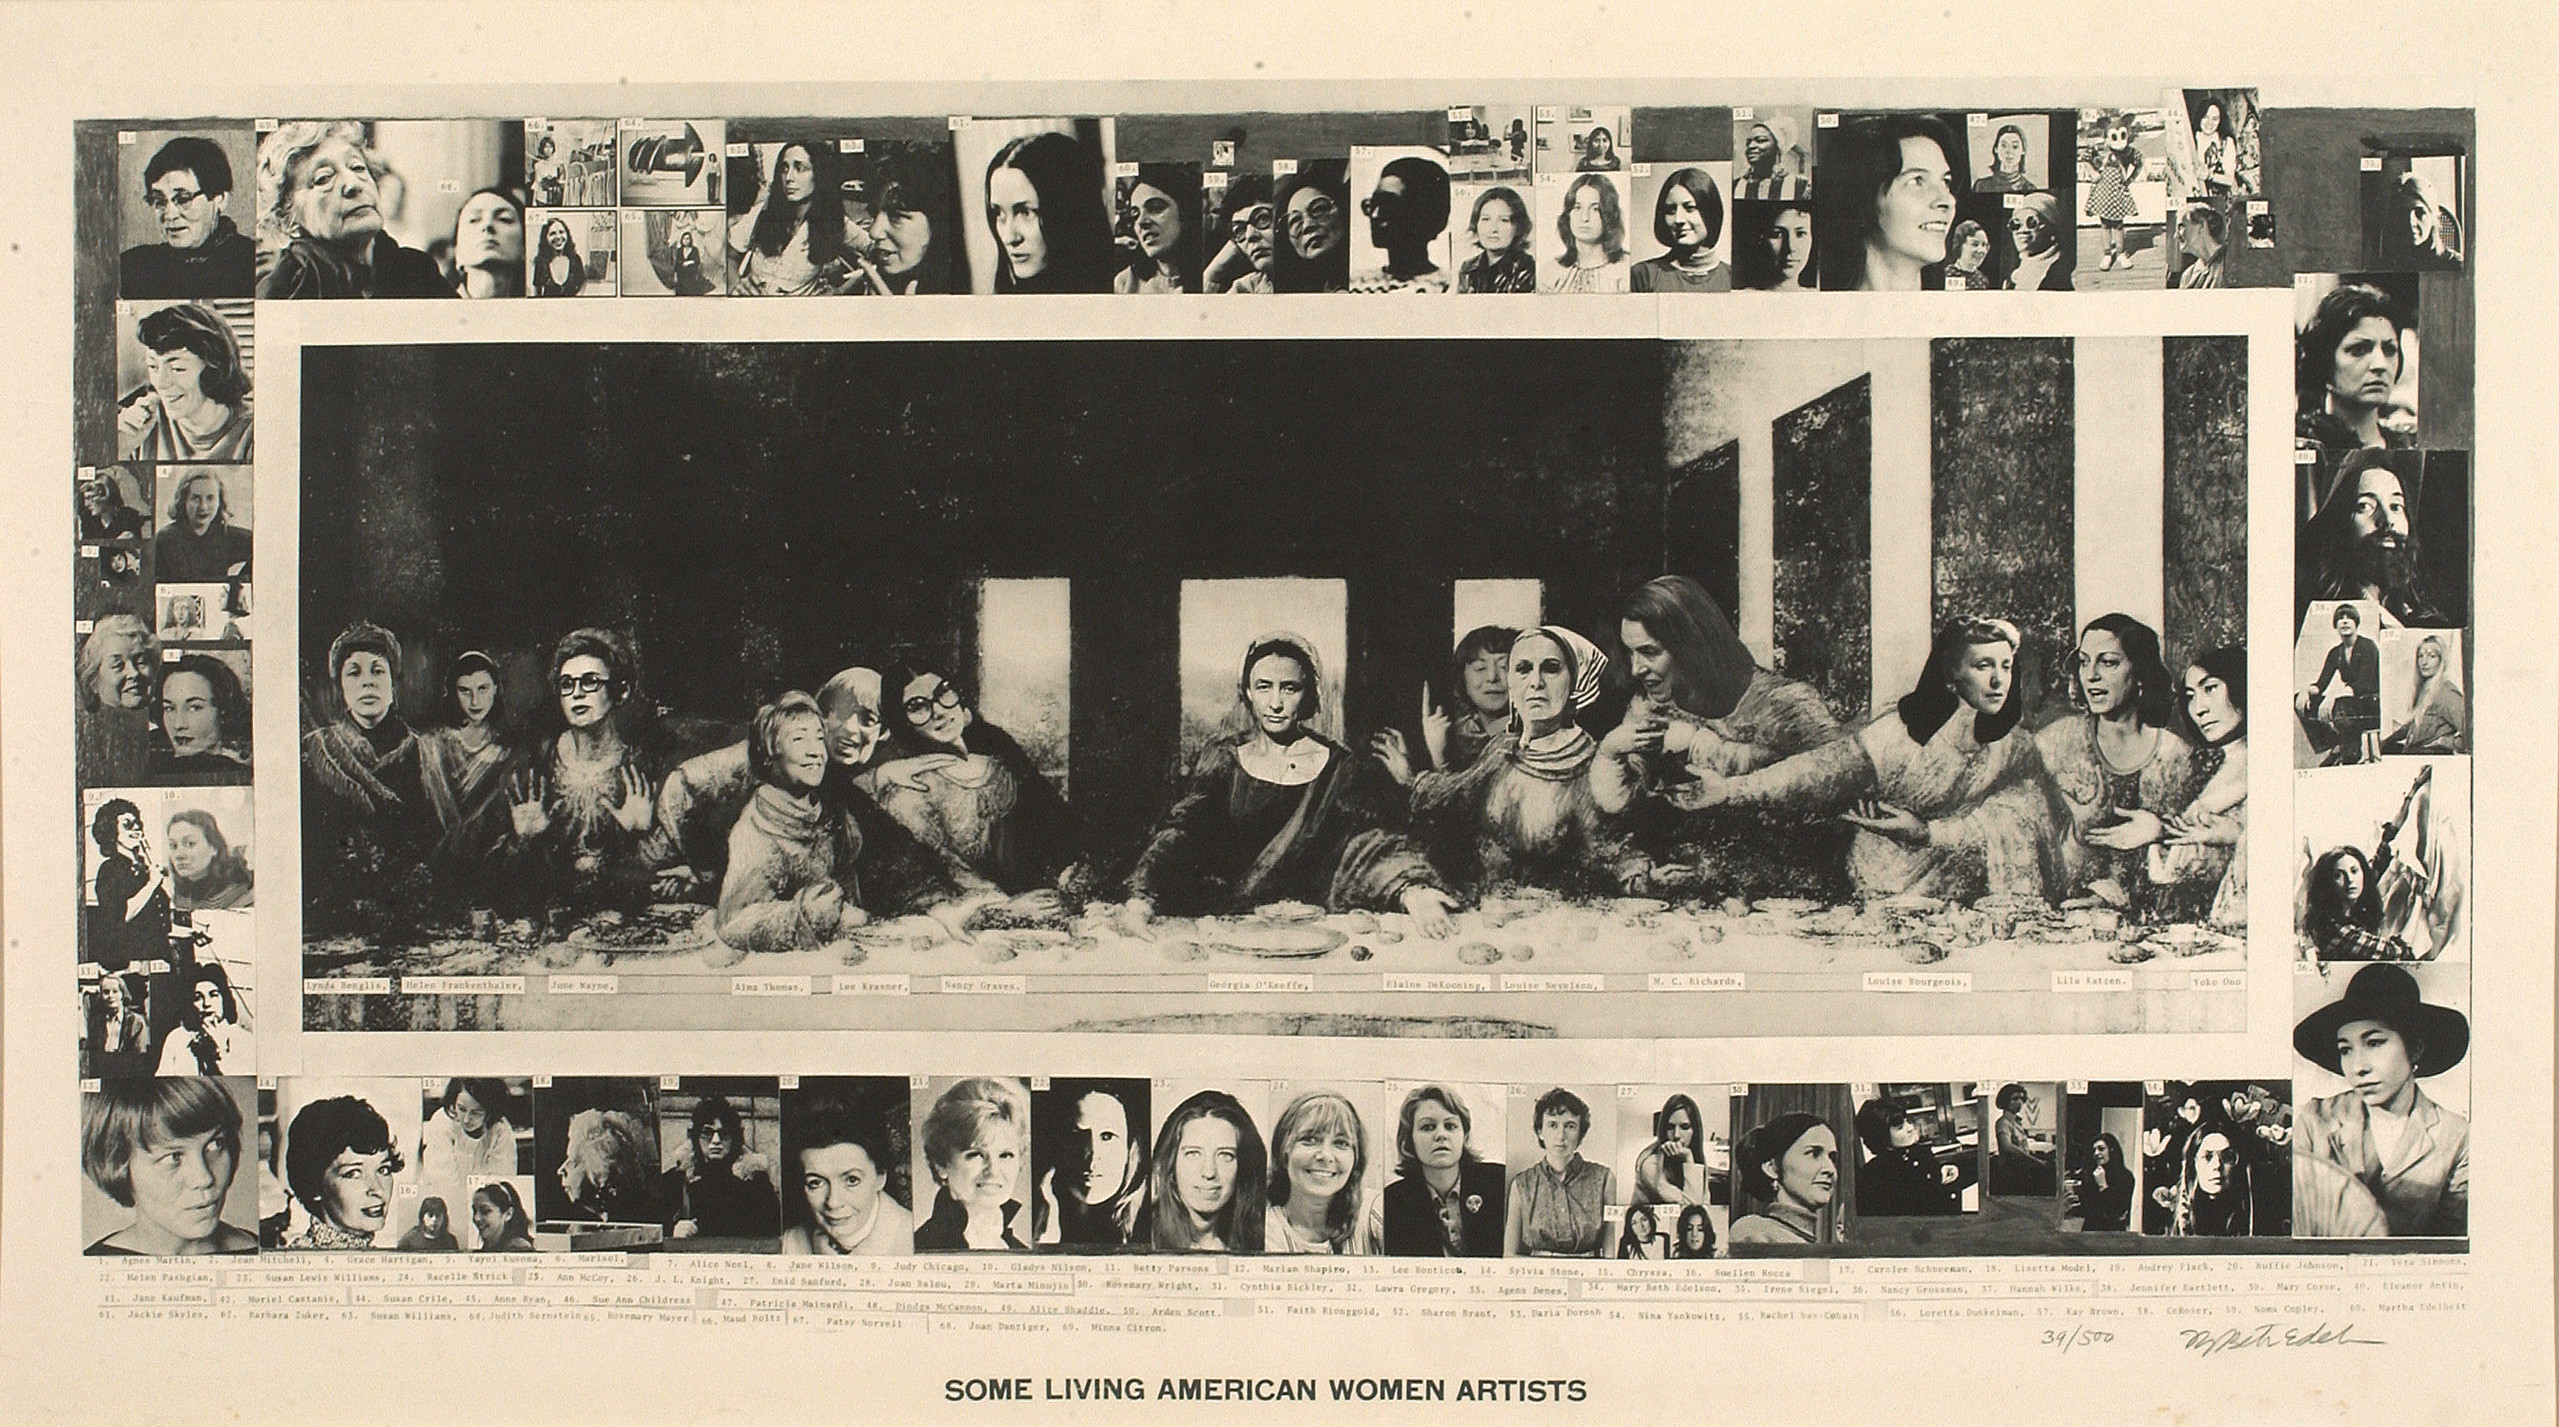 A sepia-toned lithograph print featuring the faces of many American women artists framed around a "last supper"-esque reproduction with all women, seemingly collaged.